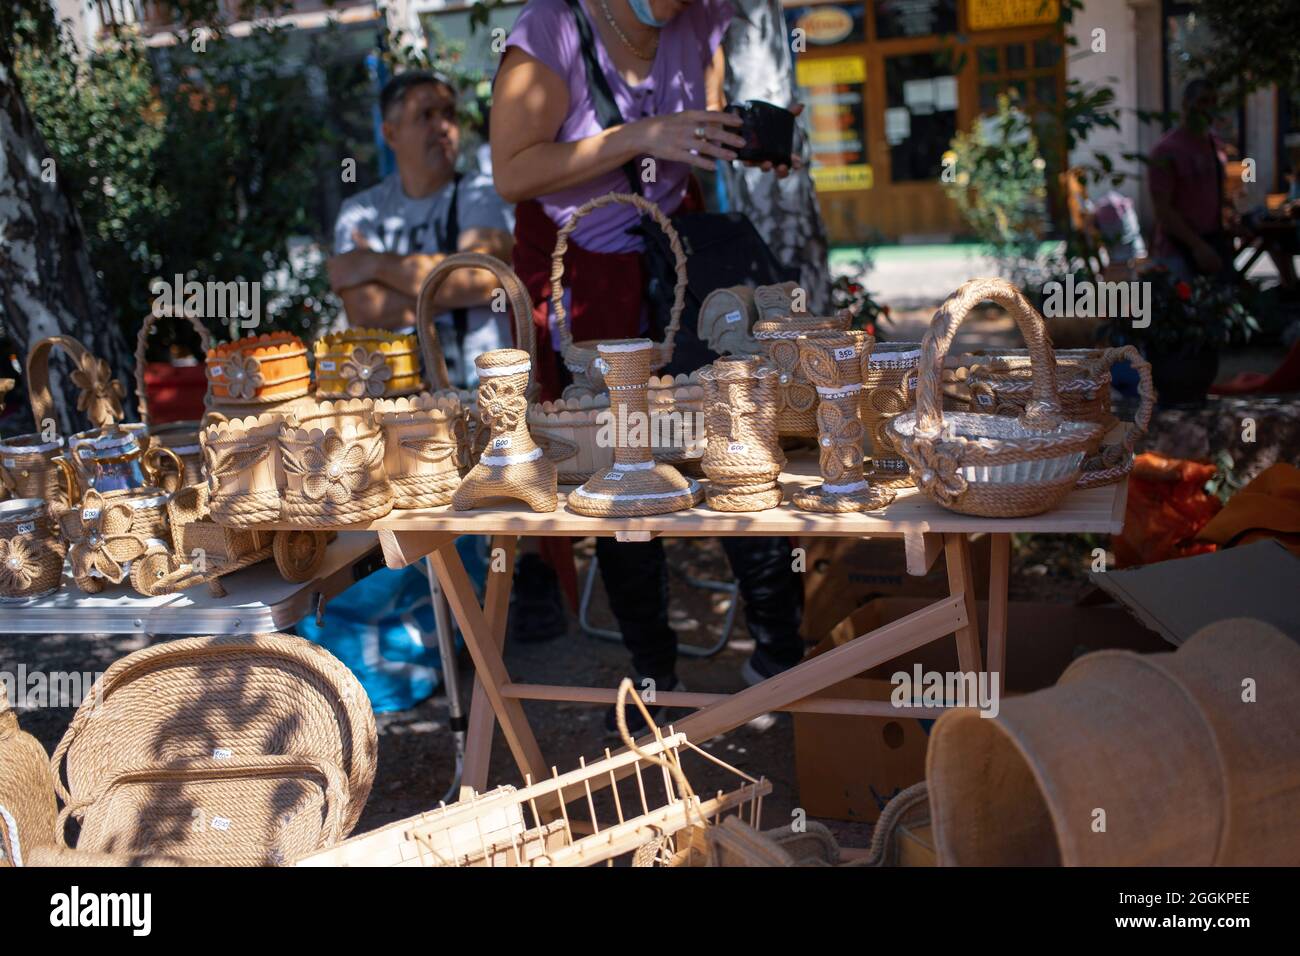 Handicrafts displayed for sale at a village fair Stock Photo